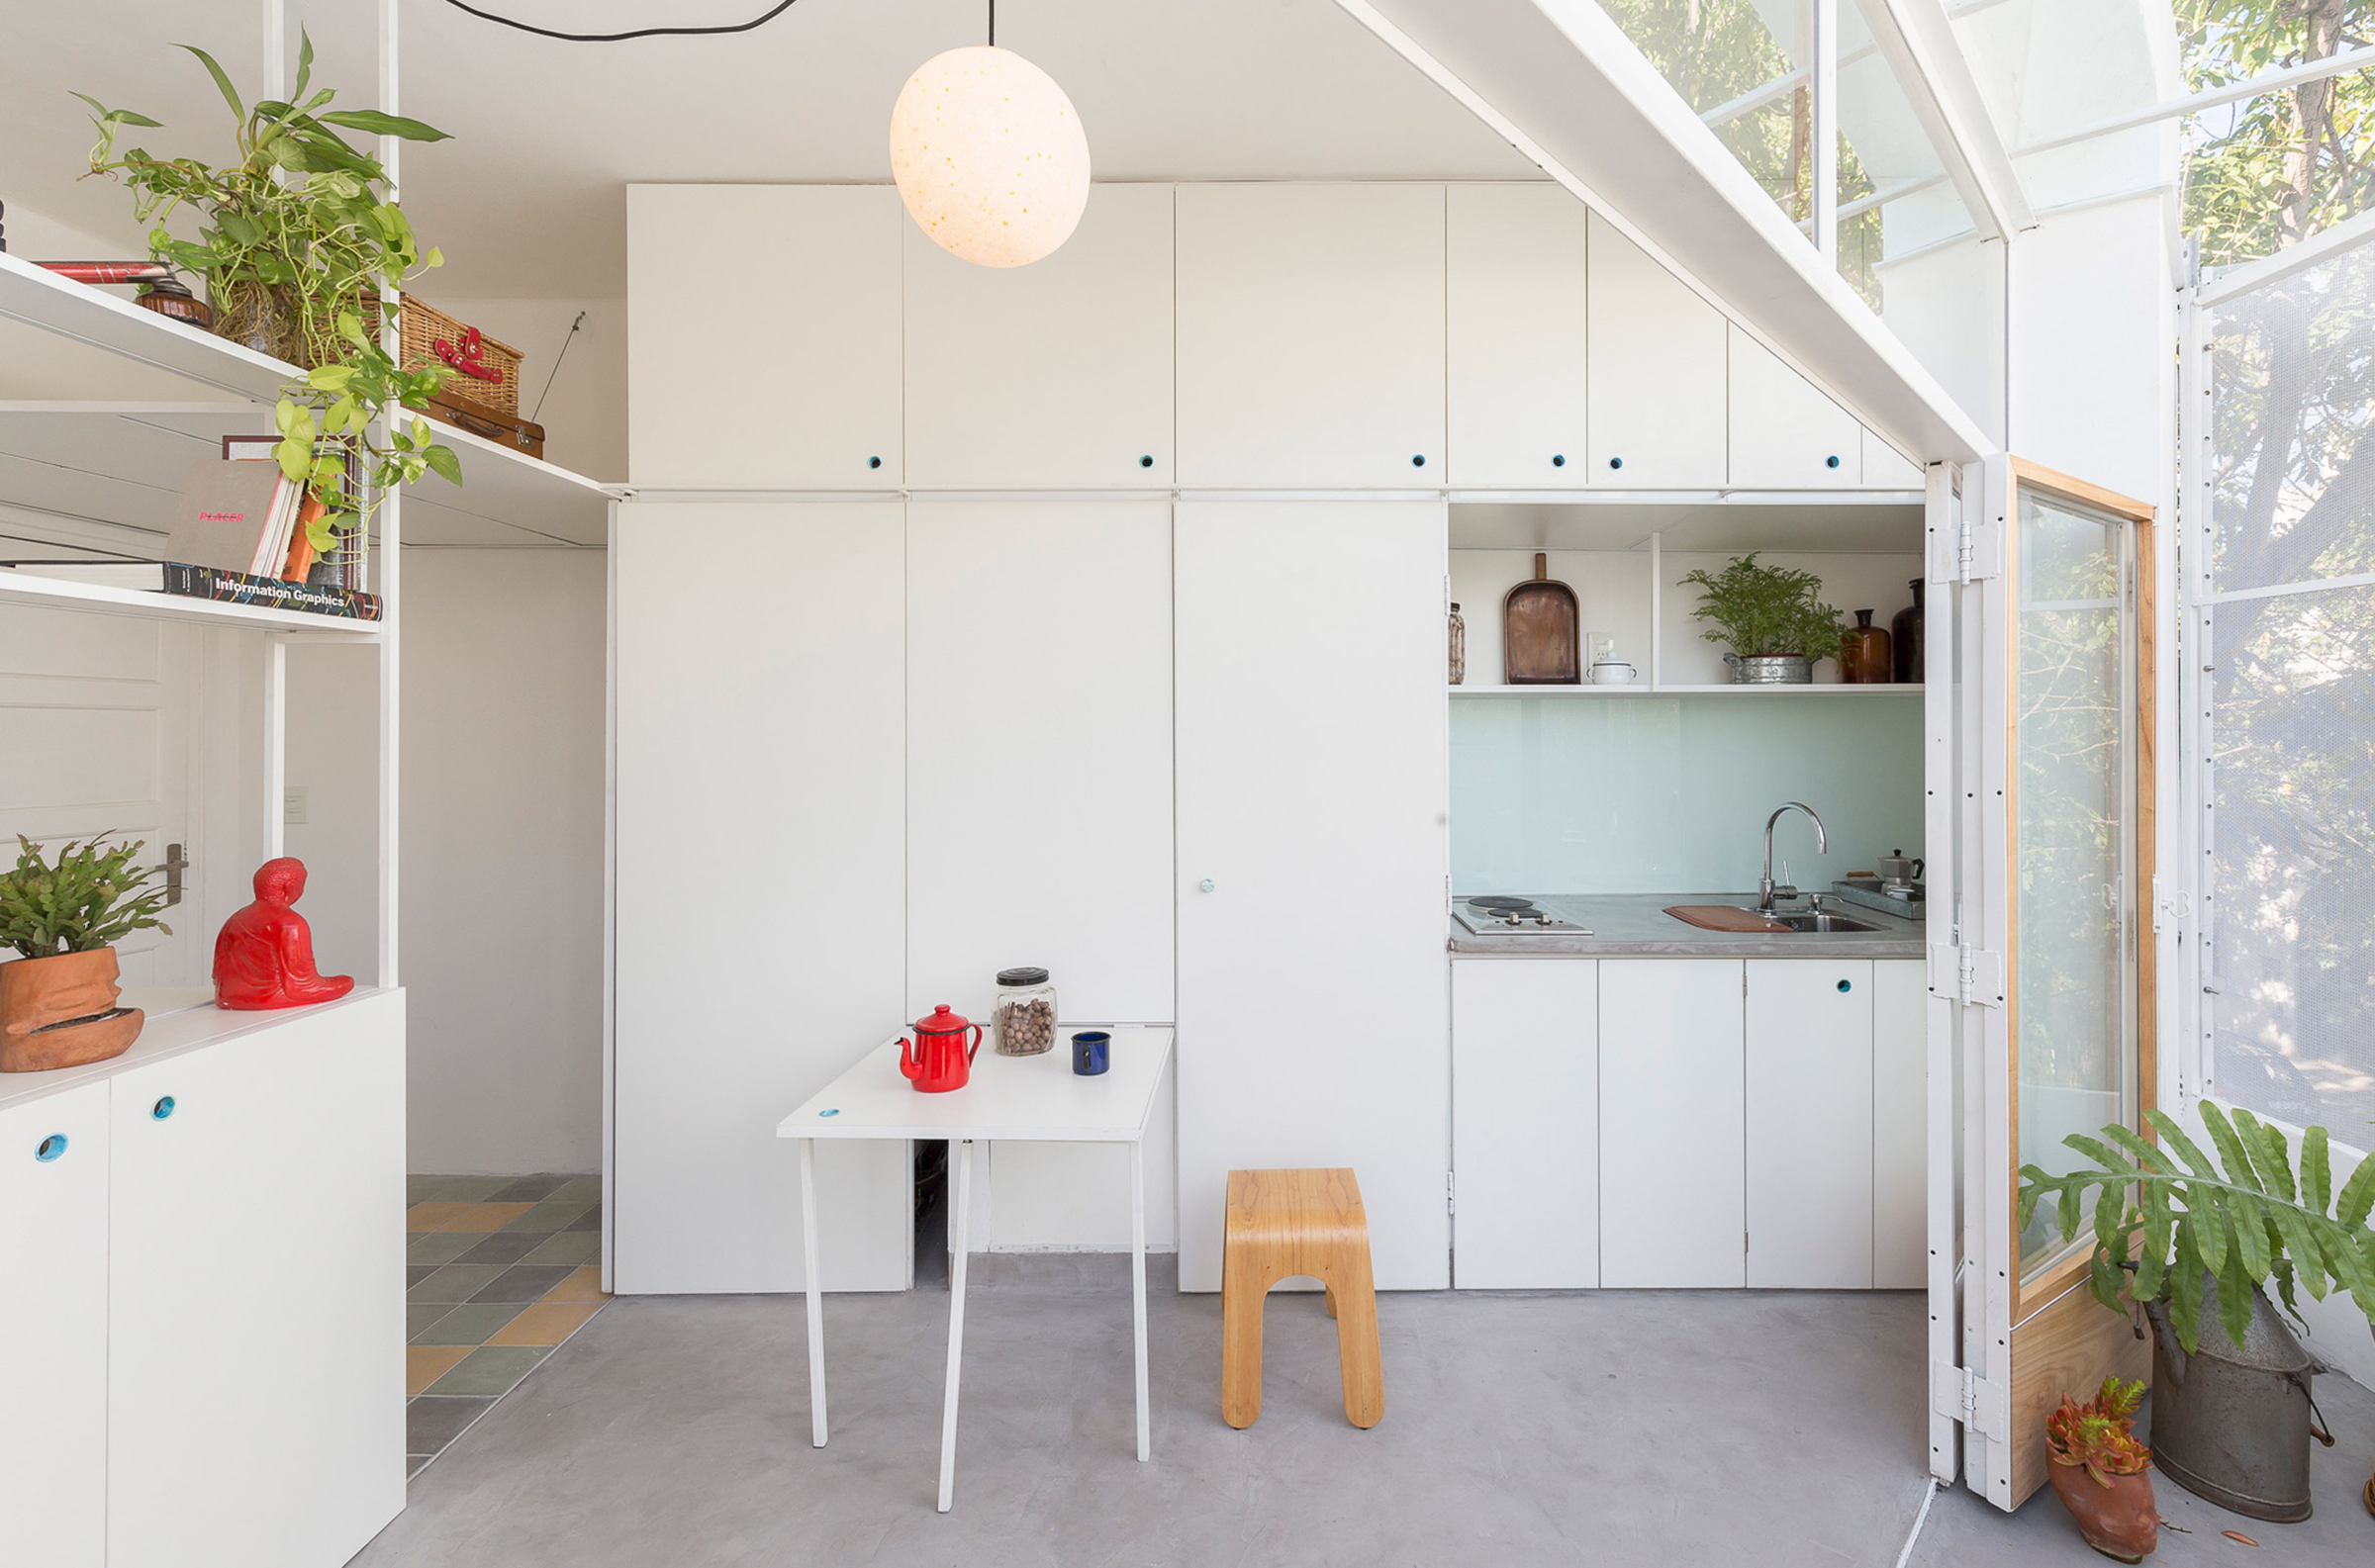 A Quick Guide To Make The Most Out Of Your Tiny Kitchen Spaces